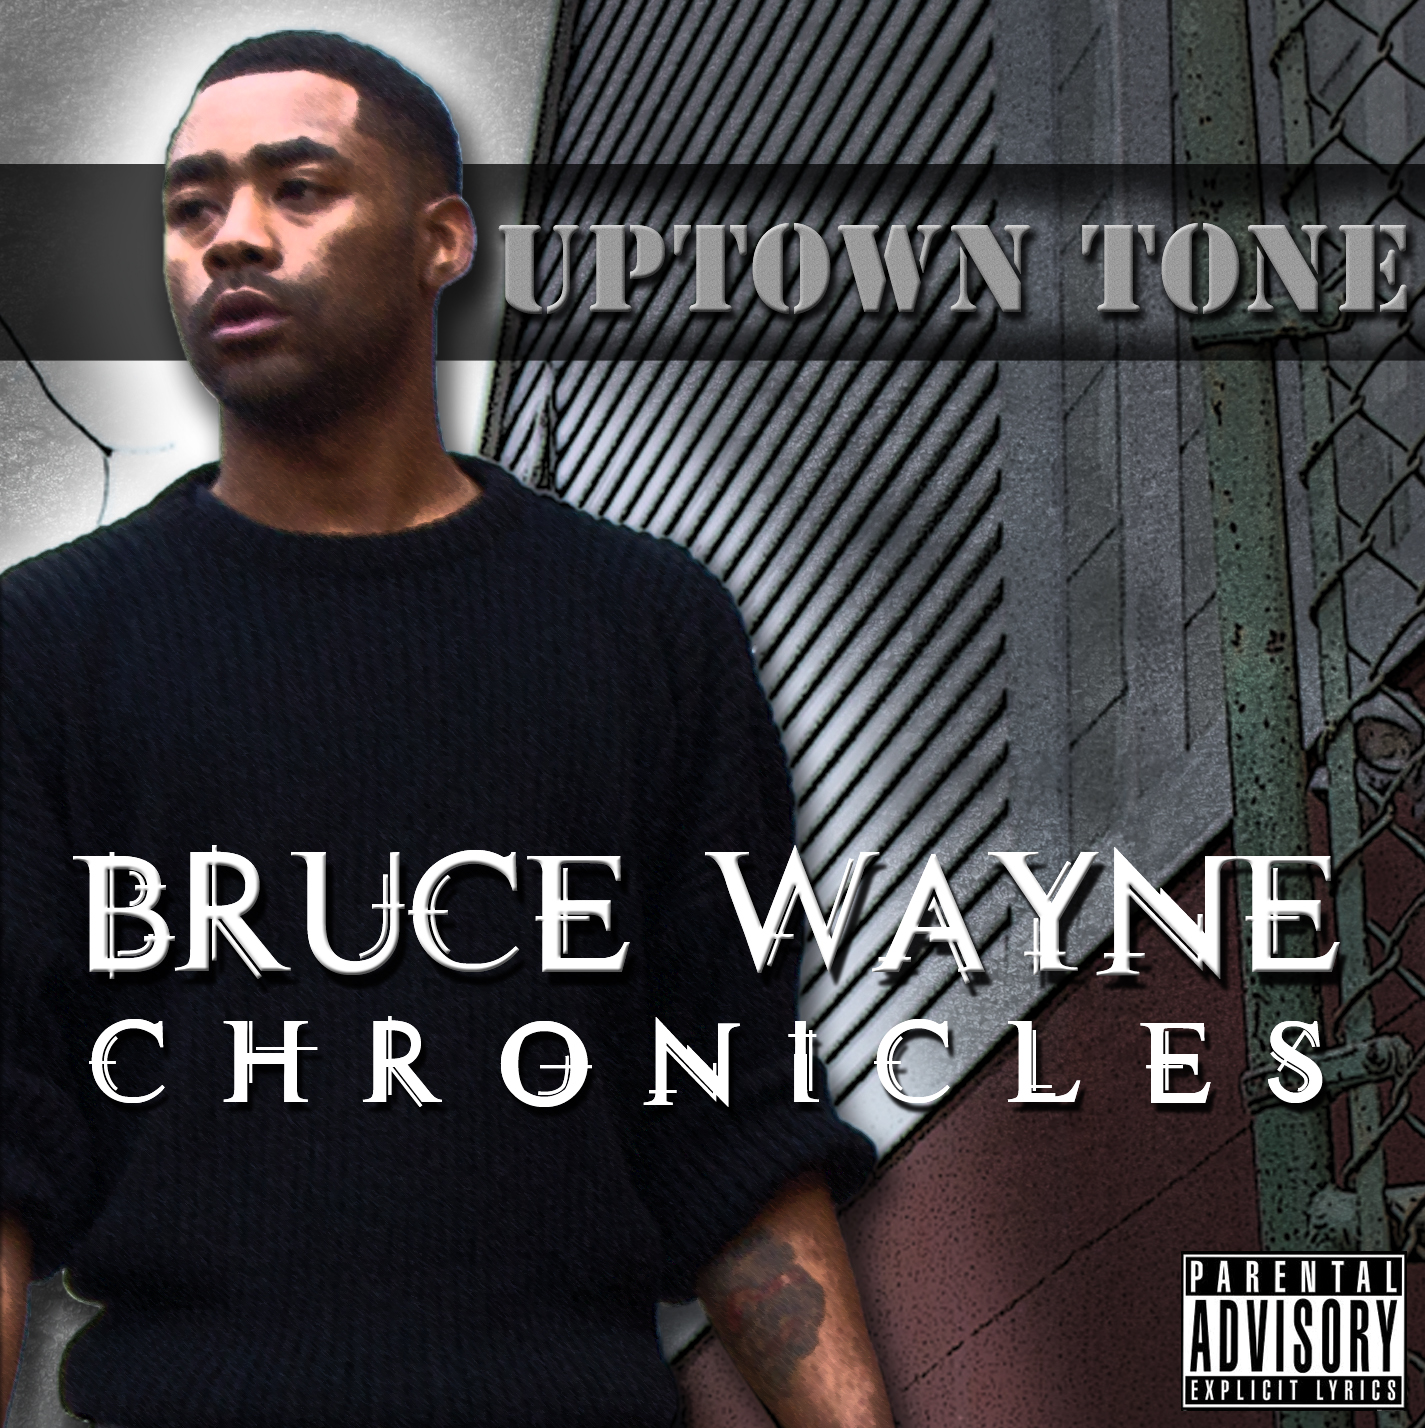 uptown-tone-bruce-wayne-chronicles-mixtape-HHS1987-2012 Uptown Tone (@UptownTone) - Bruce Wayne Chronicles (Mixtape) + Telly (Official Video)  